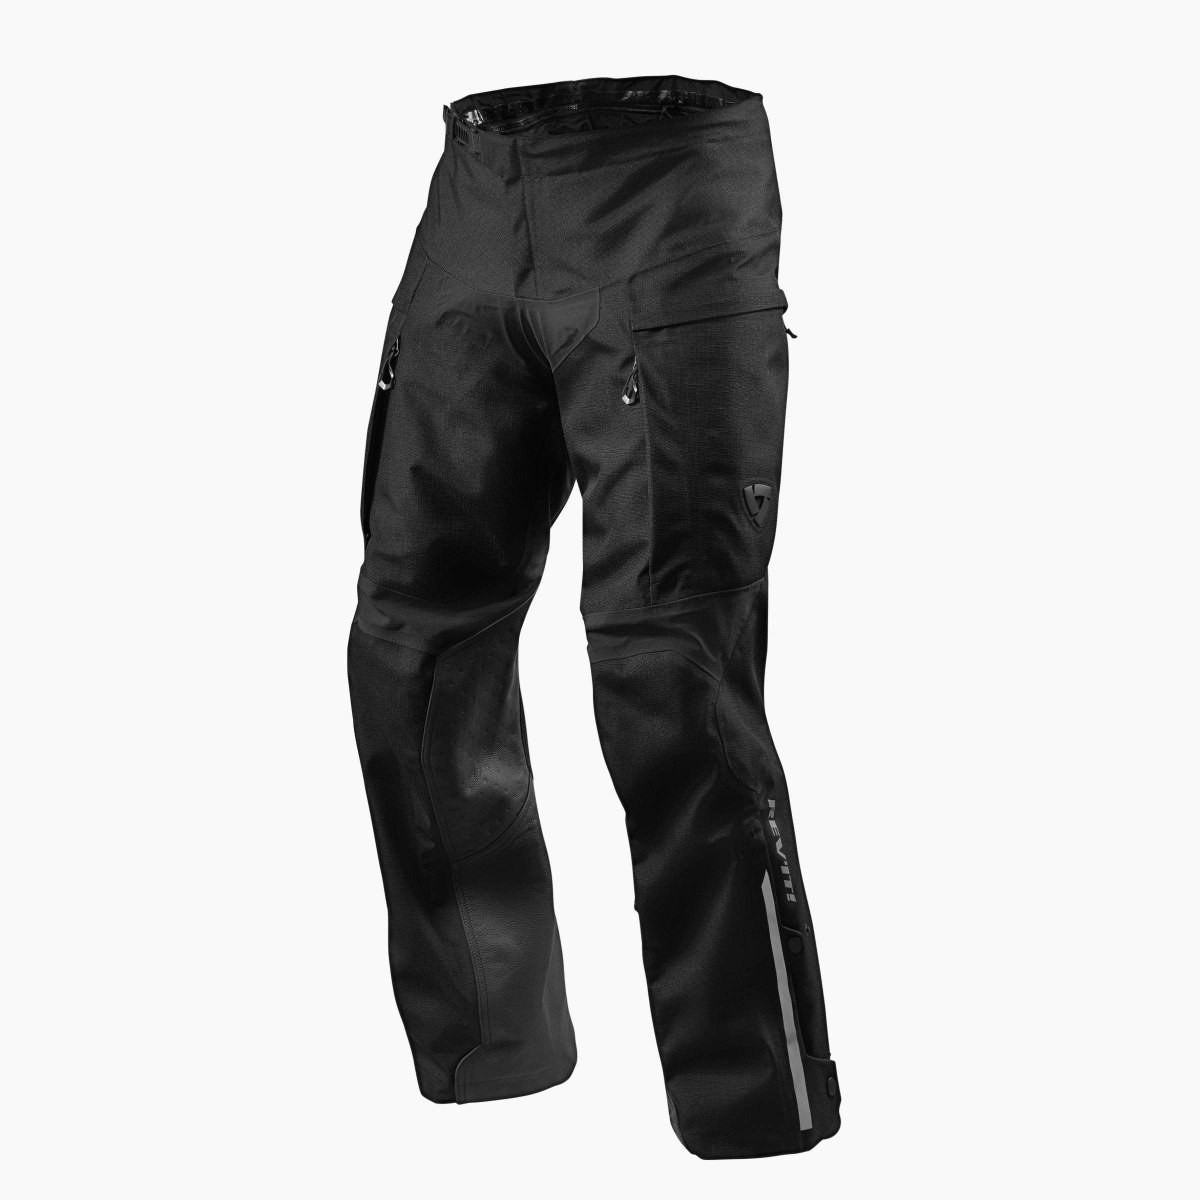 Image of REV'IT! Component H2O Short Black Motorcycle Pants Size XL ID 8700001317740